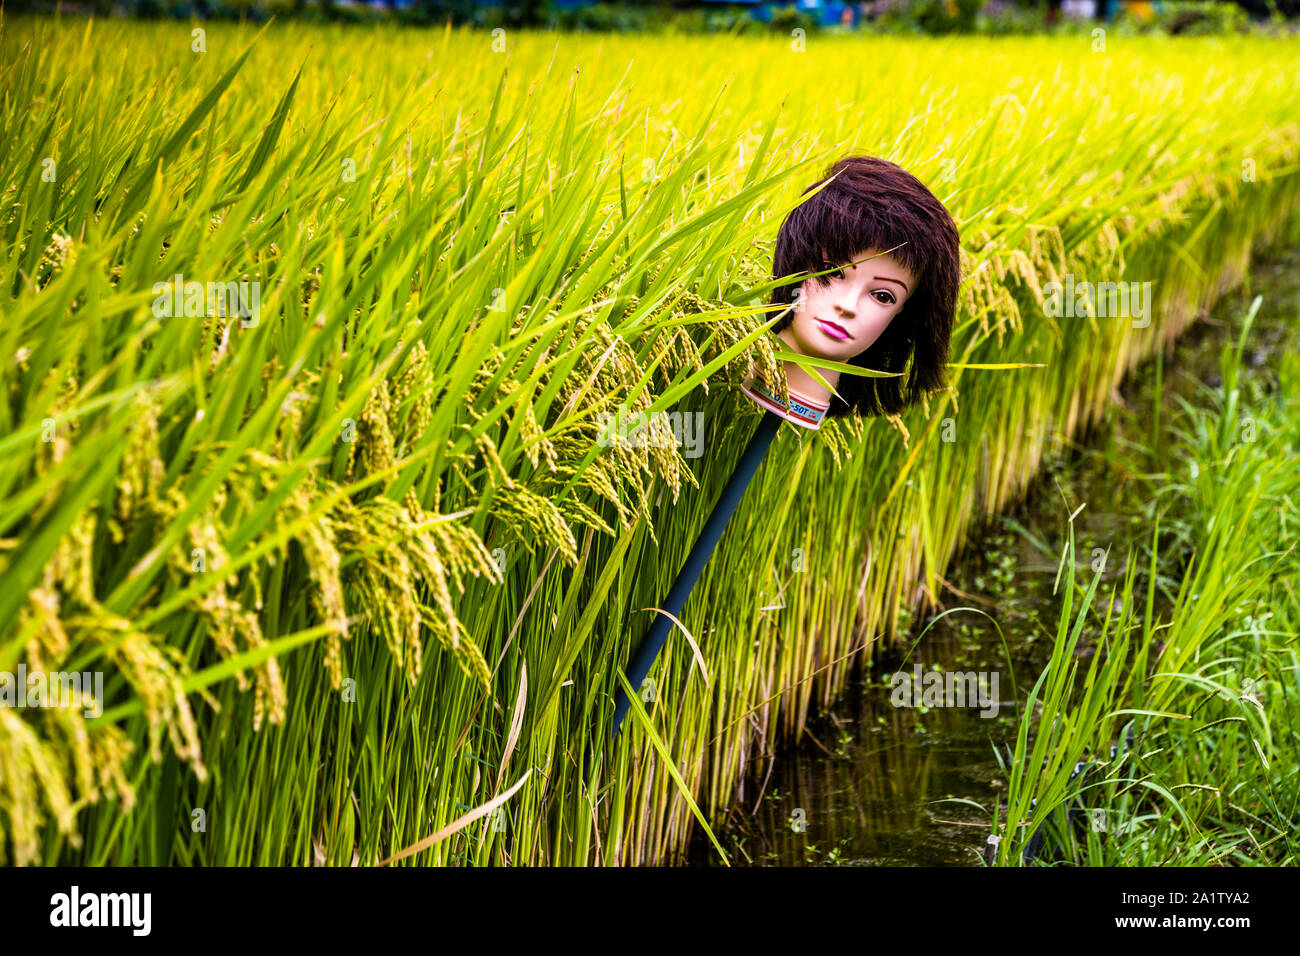 Scarecrow made of mannequin head in Rice Paddies Stock Photo